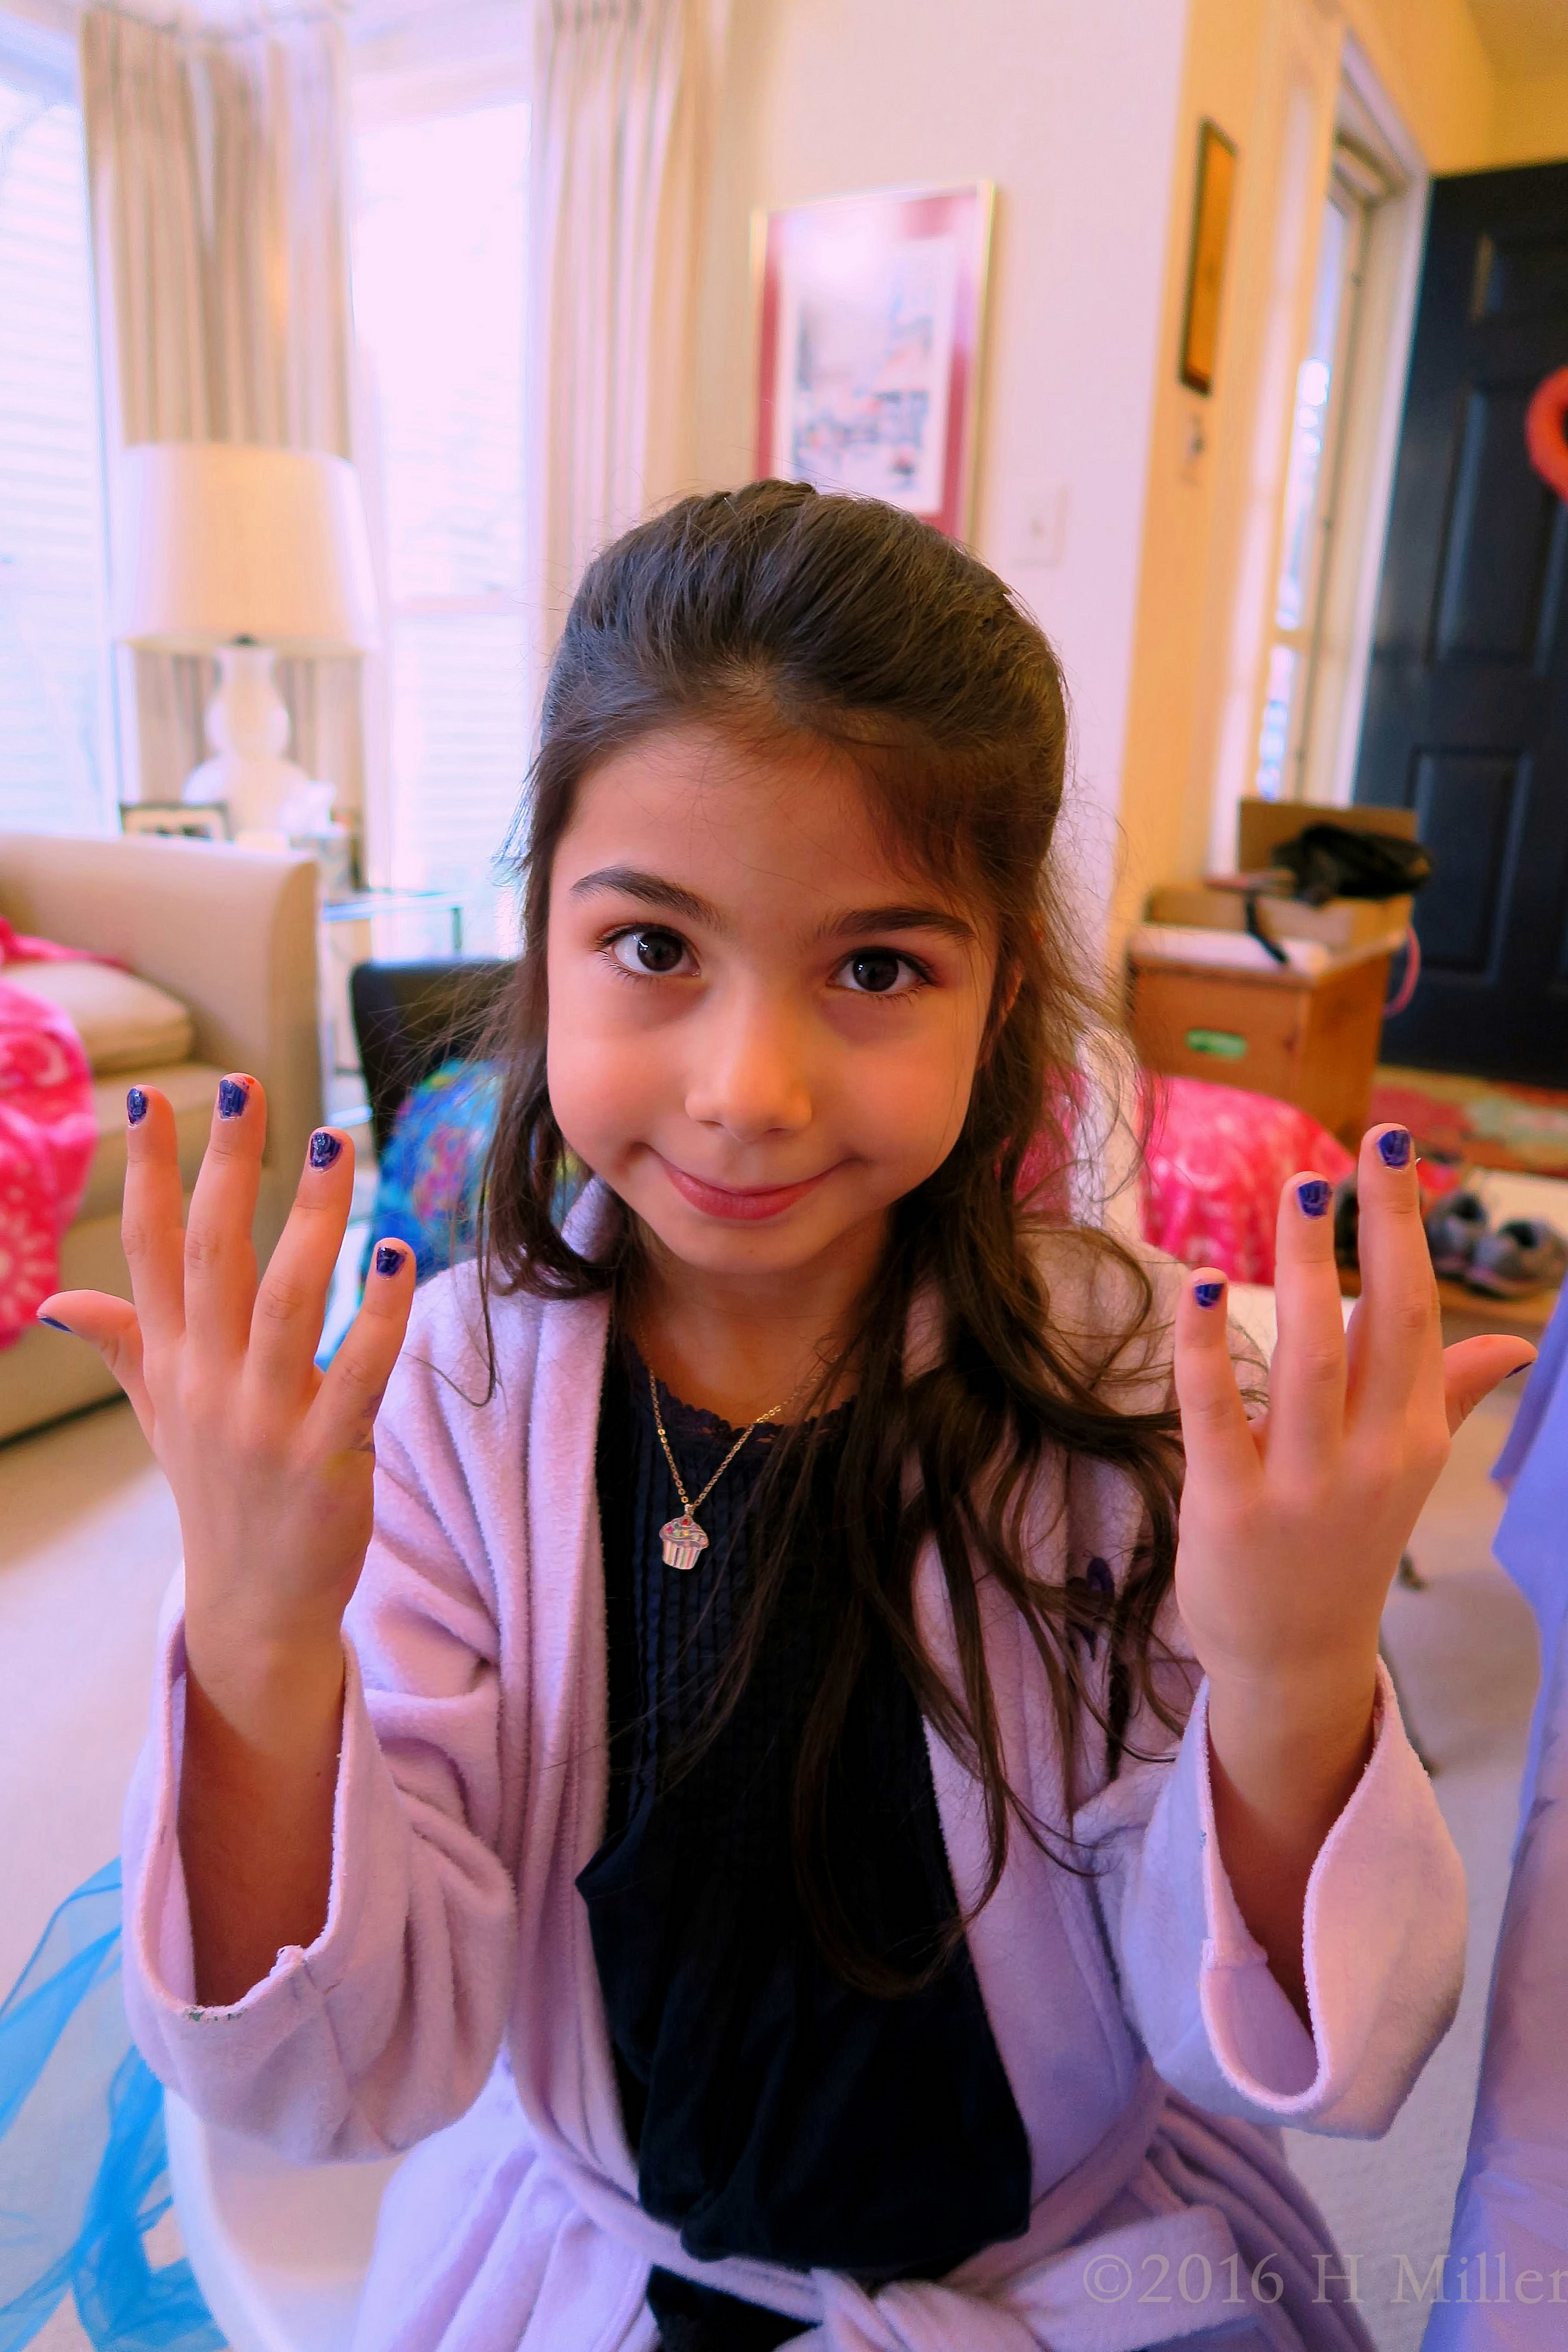 Happy With Her Kids Manicure!